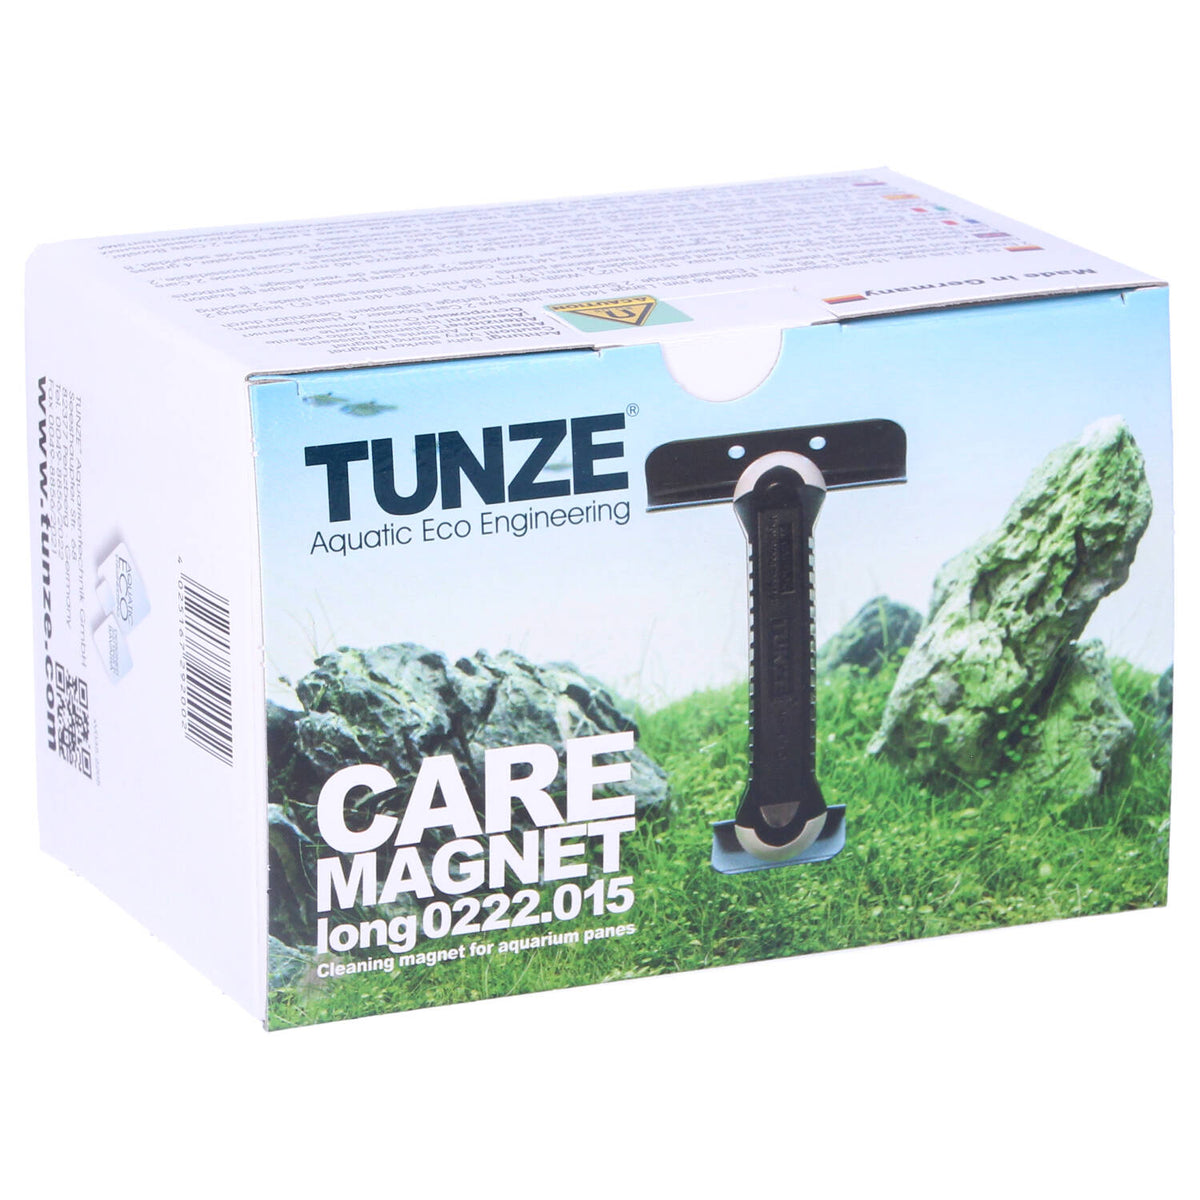 Tunze Care Magnet, Review